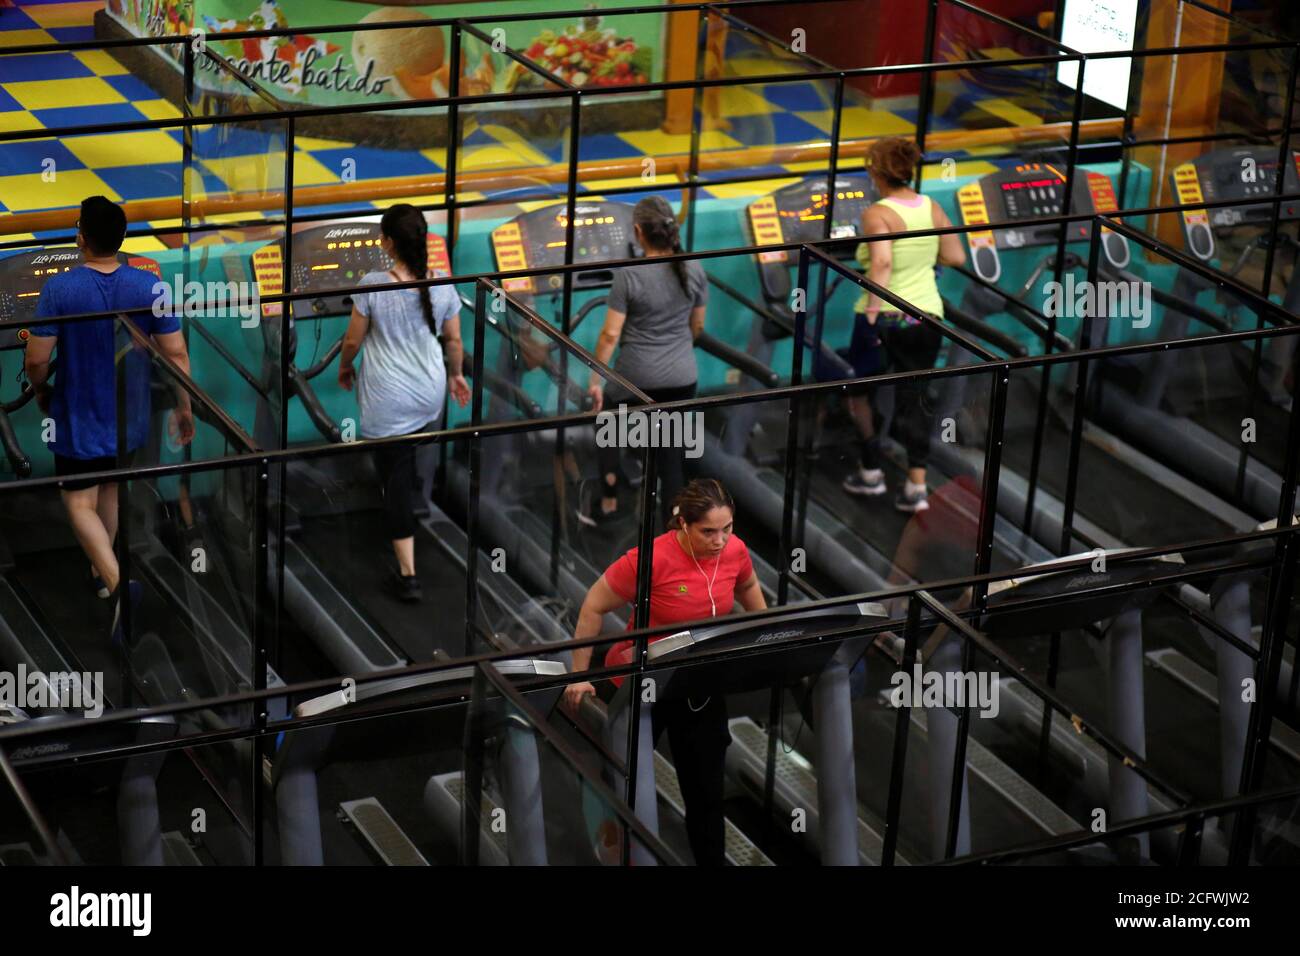 Members exercise at Bally Sport Center, after a five-month quarantine, amid  the coronavirus disease (COVID-19) pandemic, in Antiguo Cuscatlan, El  Salvador September 7, 2020. REUTERS/Jose Cabezas Stock Photo - Alamy